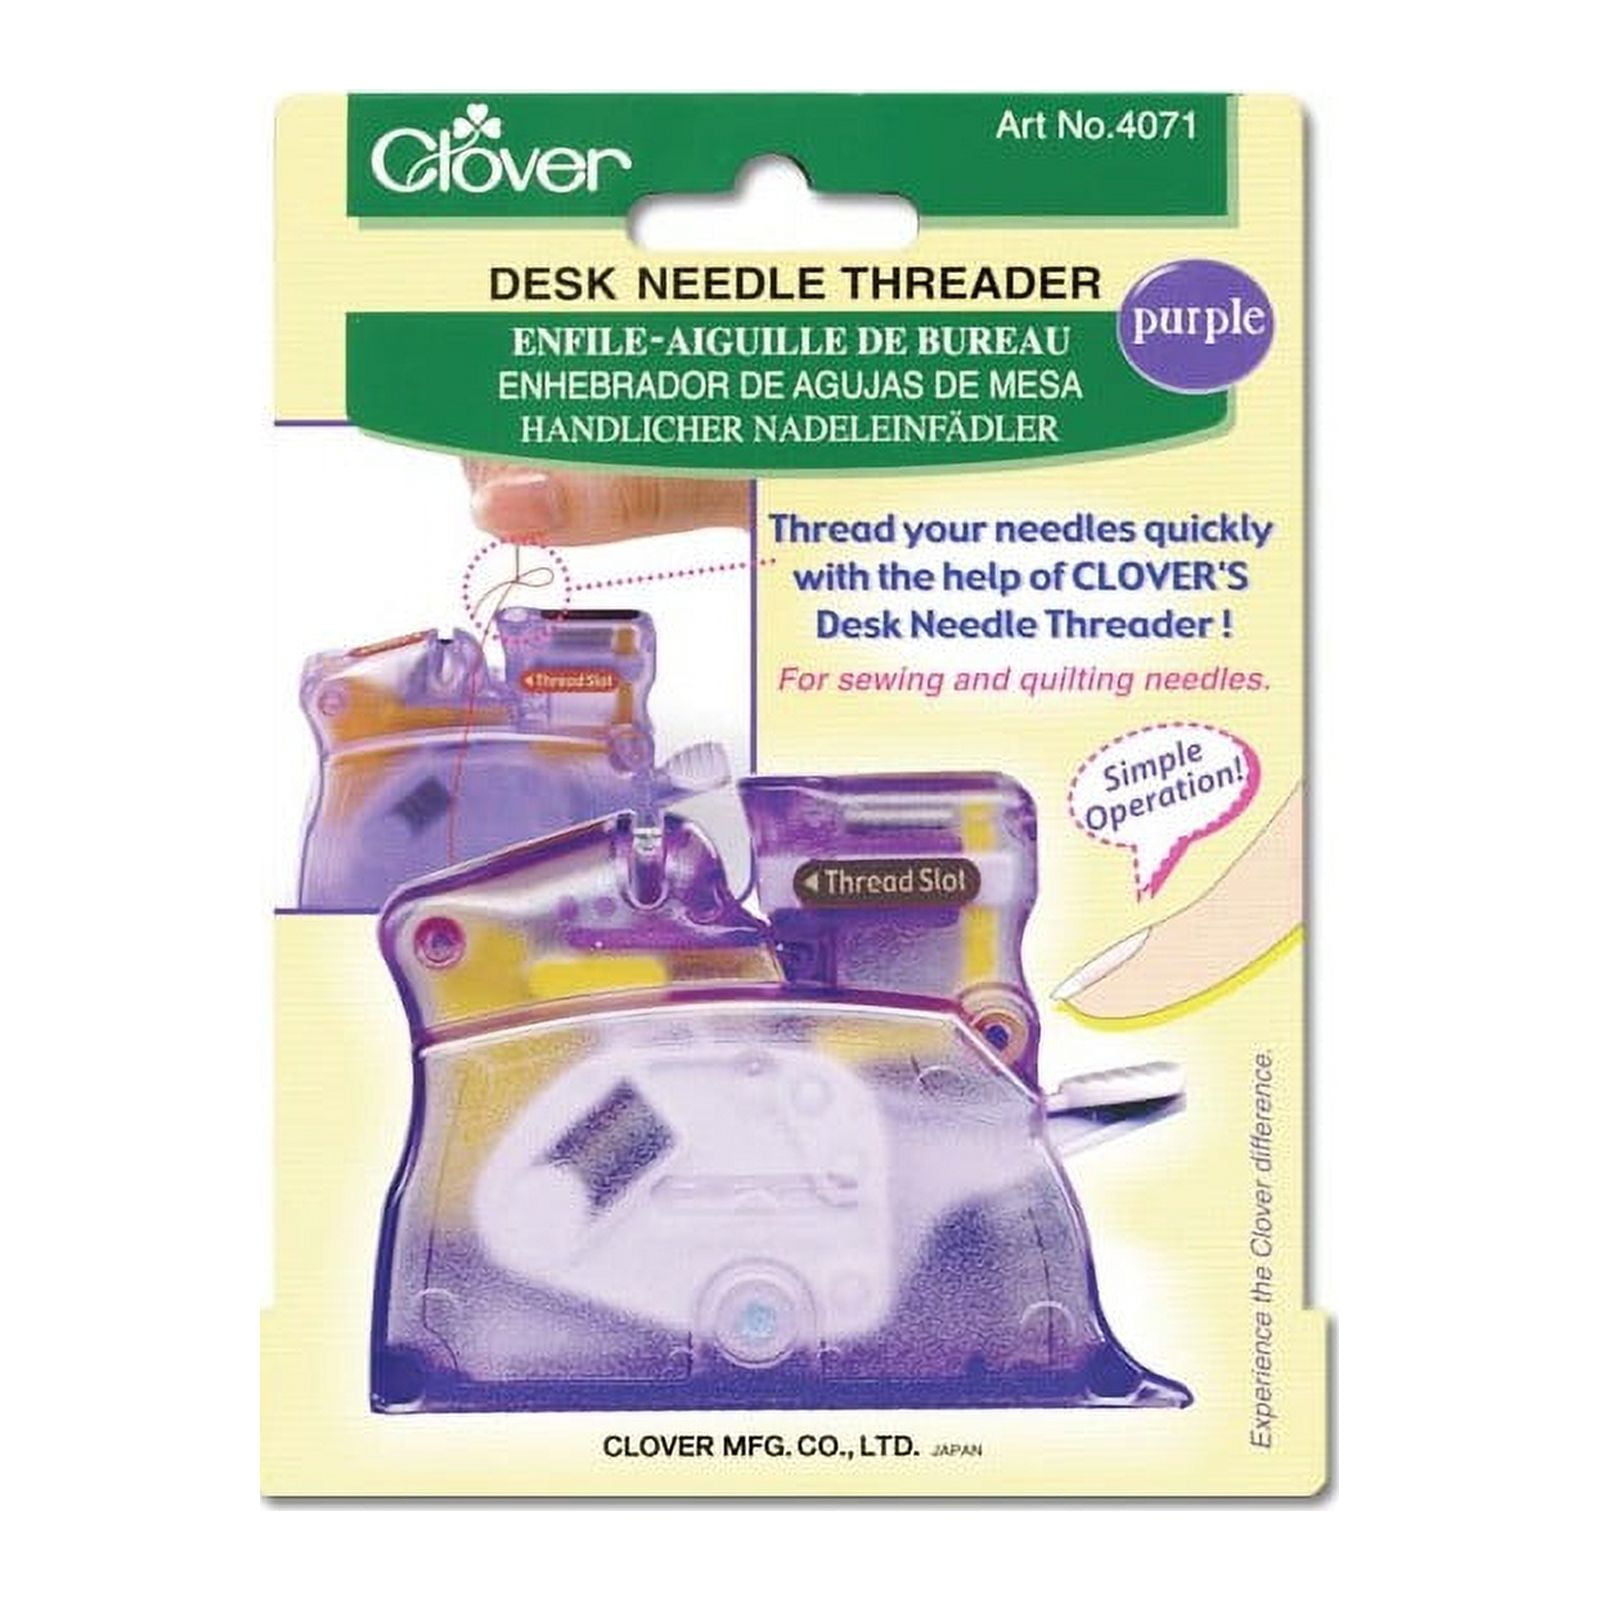 Clover Desk Needle Threader - Product Review 